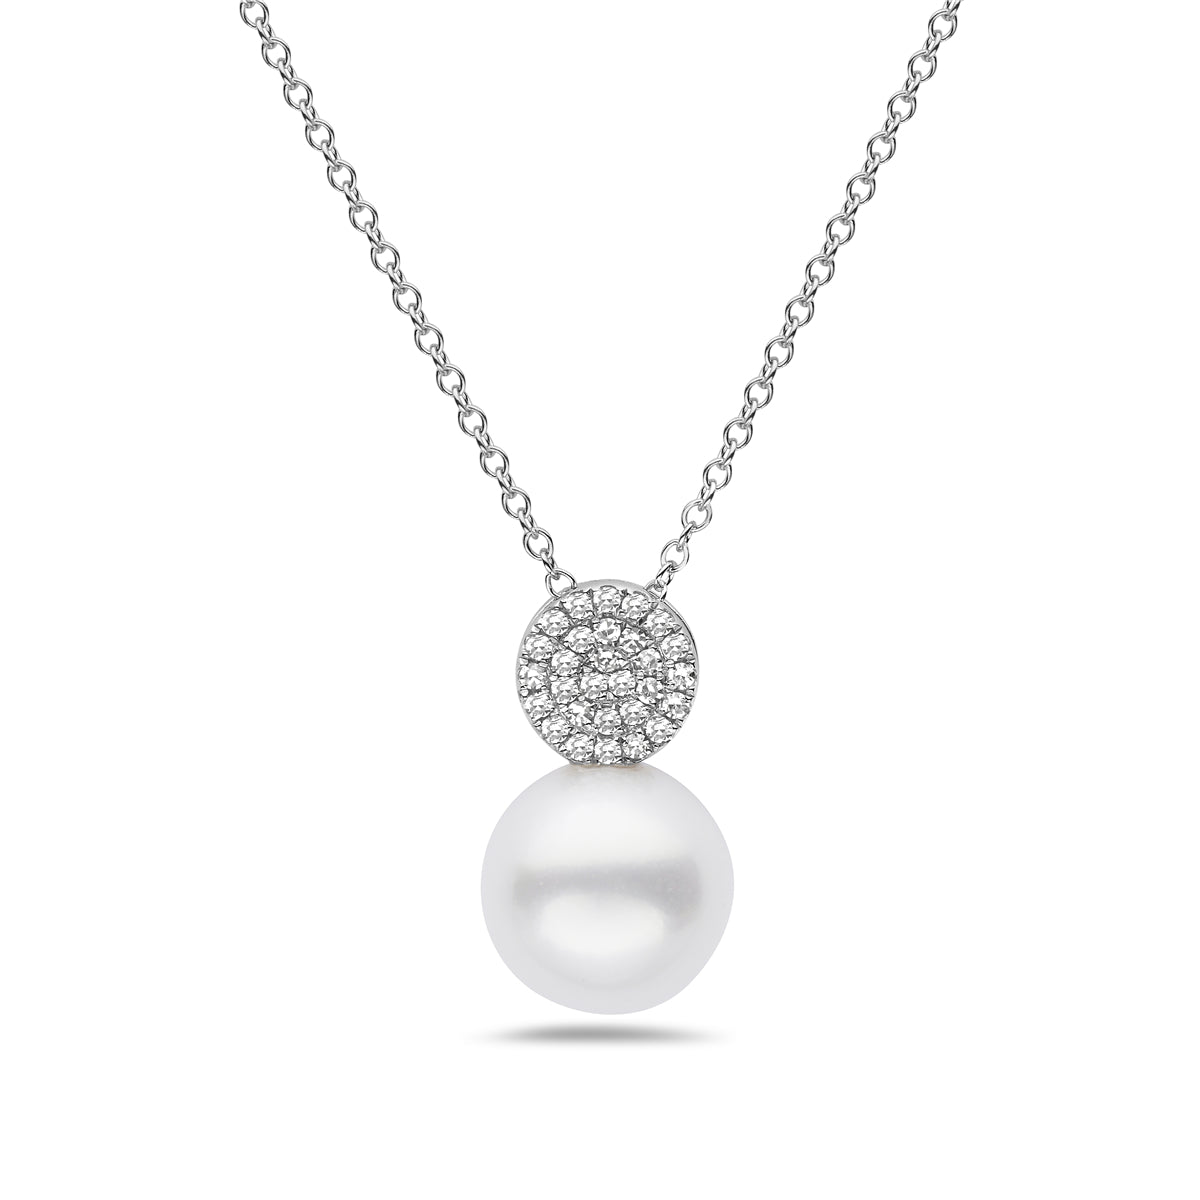 0.15ctw Diamond & Cultured Pearl Fashion 14kt White Gold Necklace